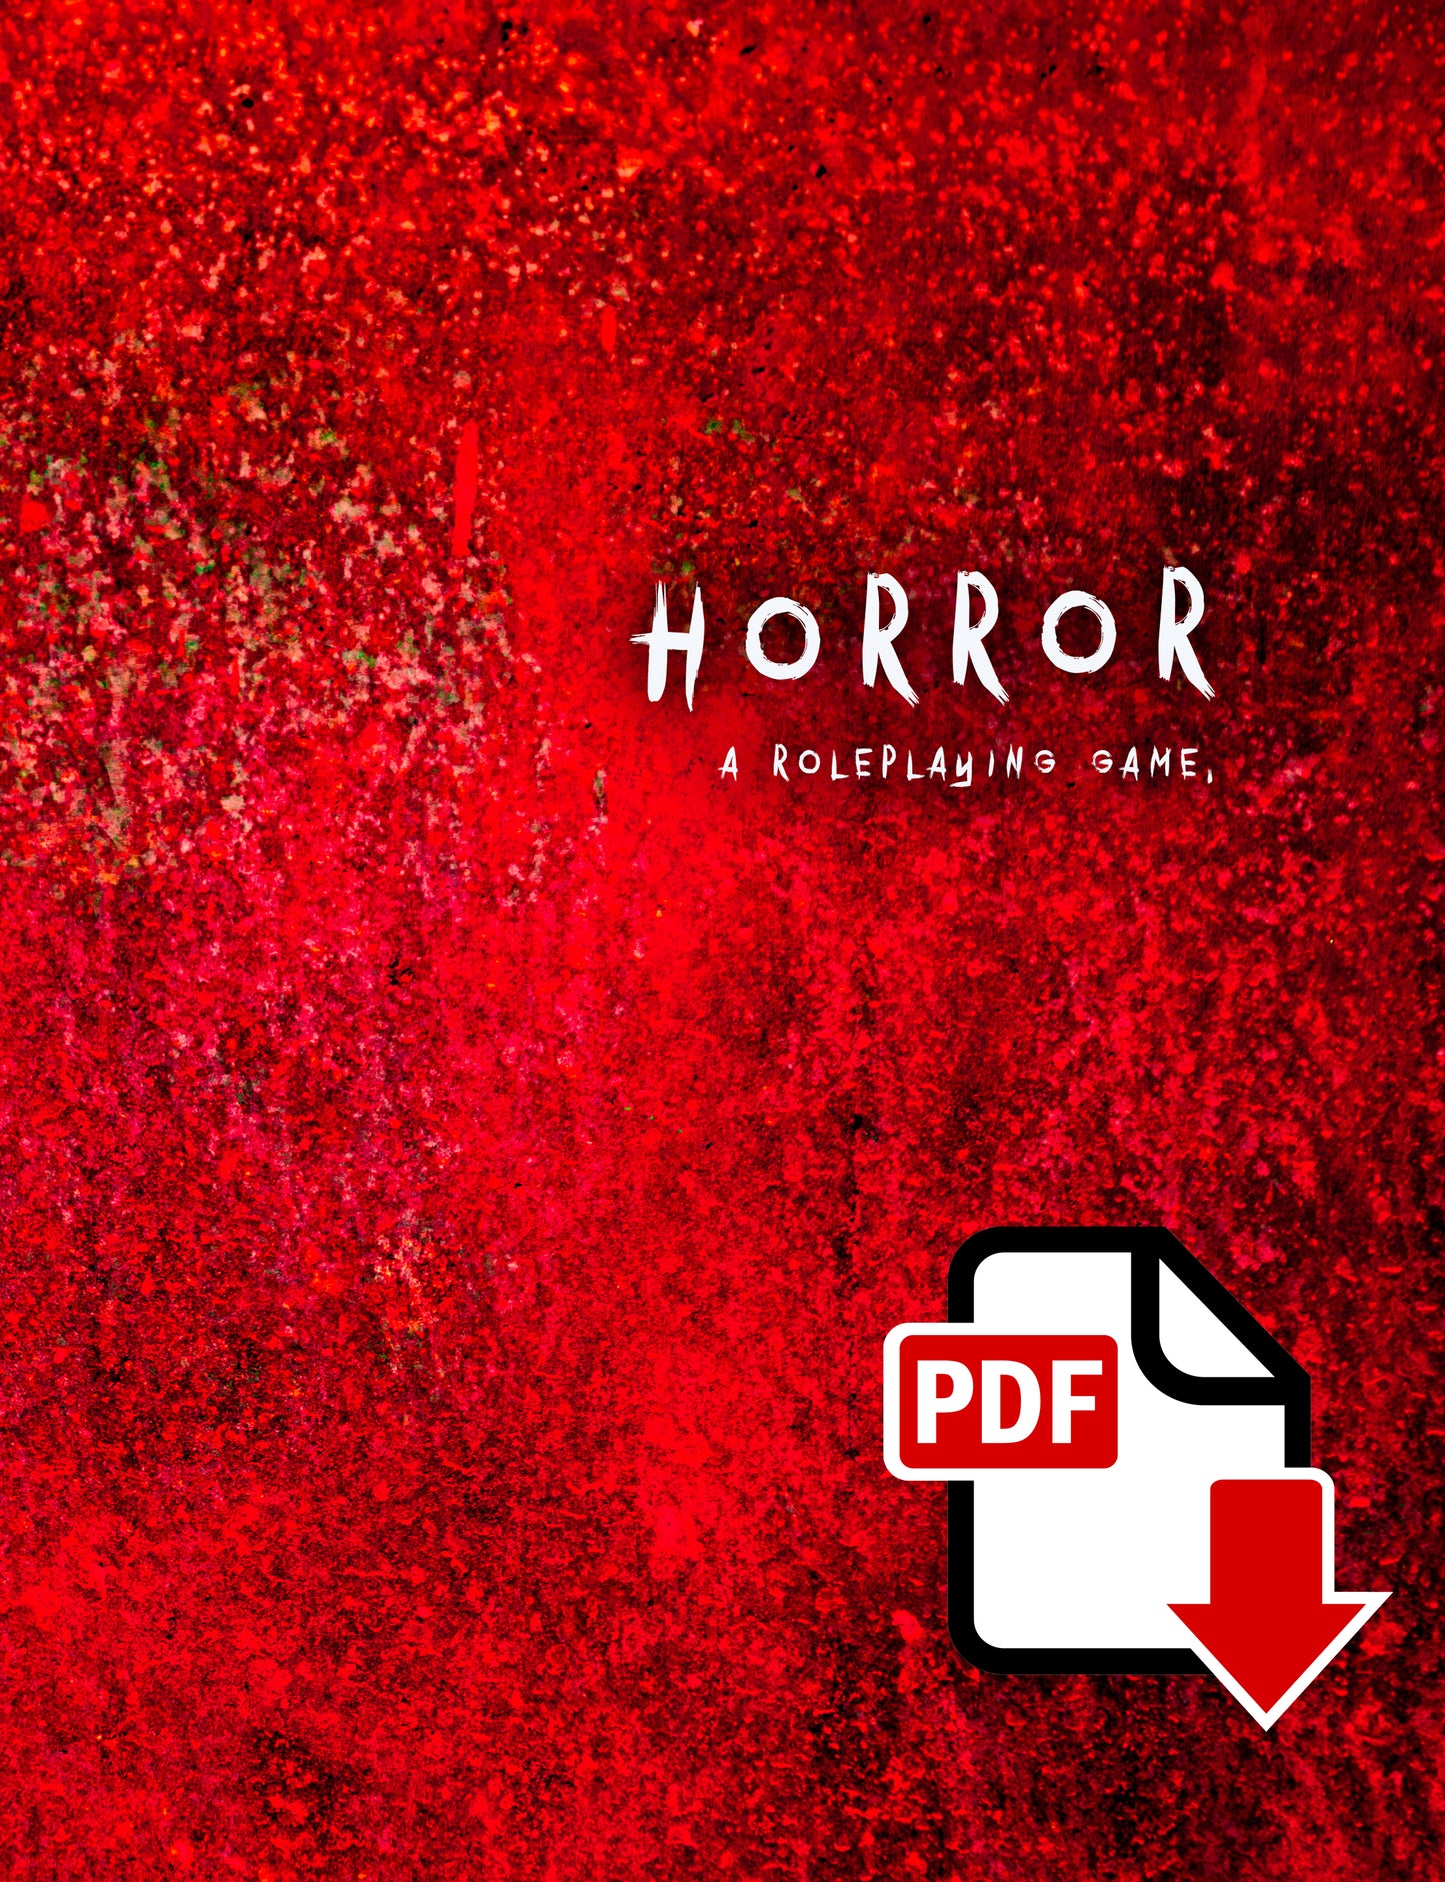 Horror: A Roleplaying Game PDF Only